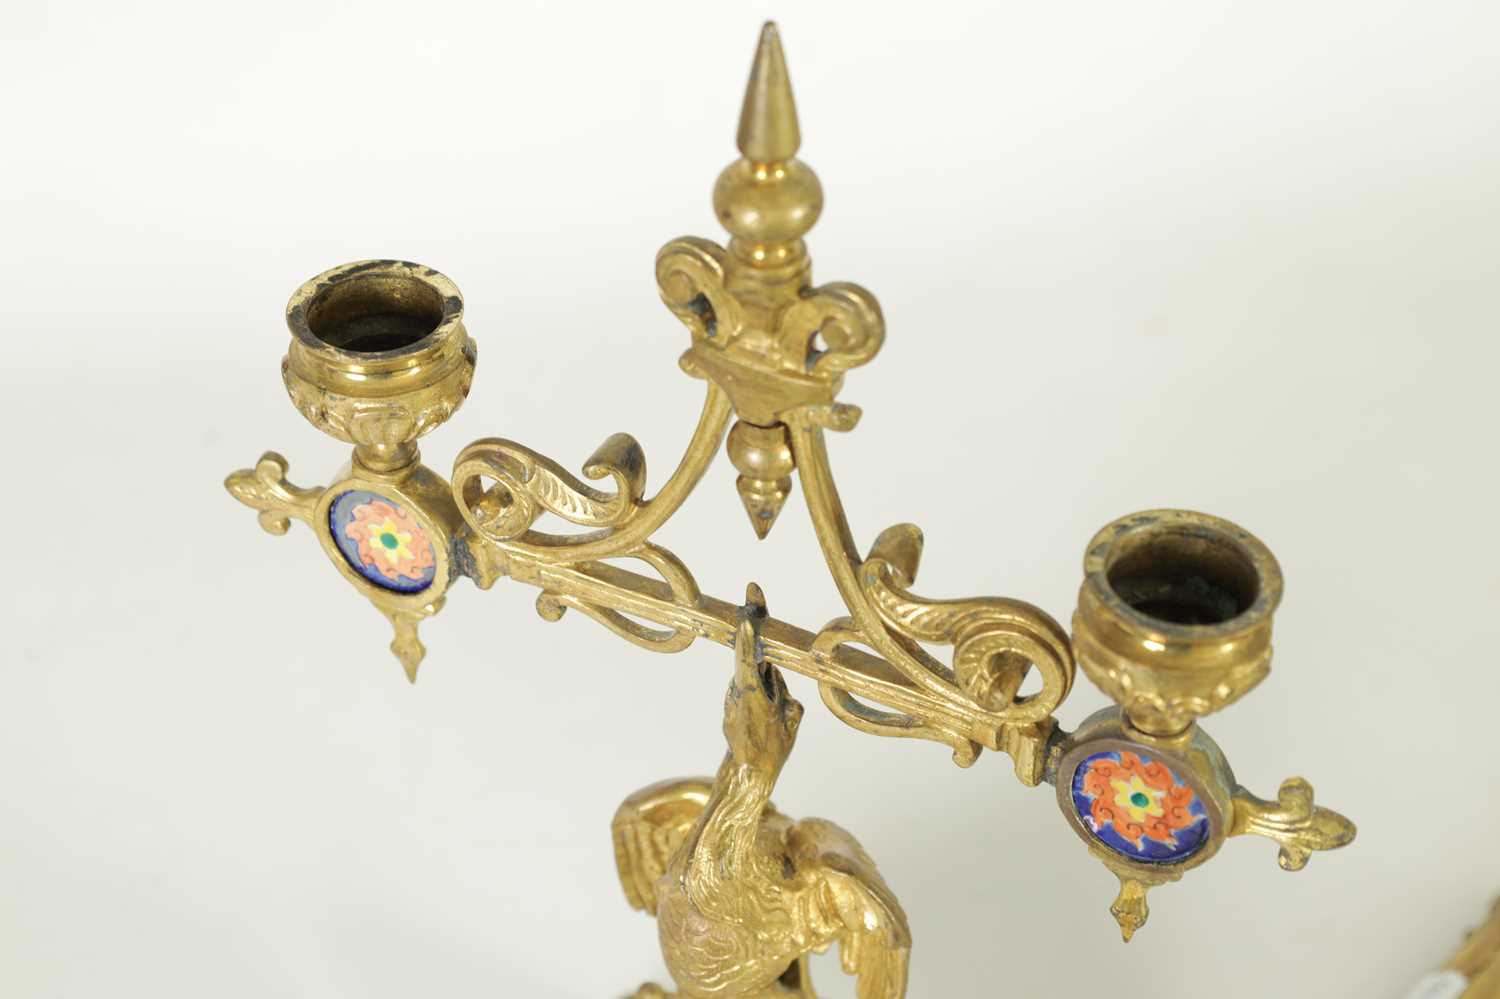 A PAIR OF LATE 19TH CENTURY BRASS AESTHETIC PERIOD DOUBLE BRANCH CANDELABRA - Image 4 of 10